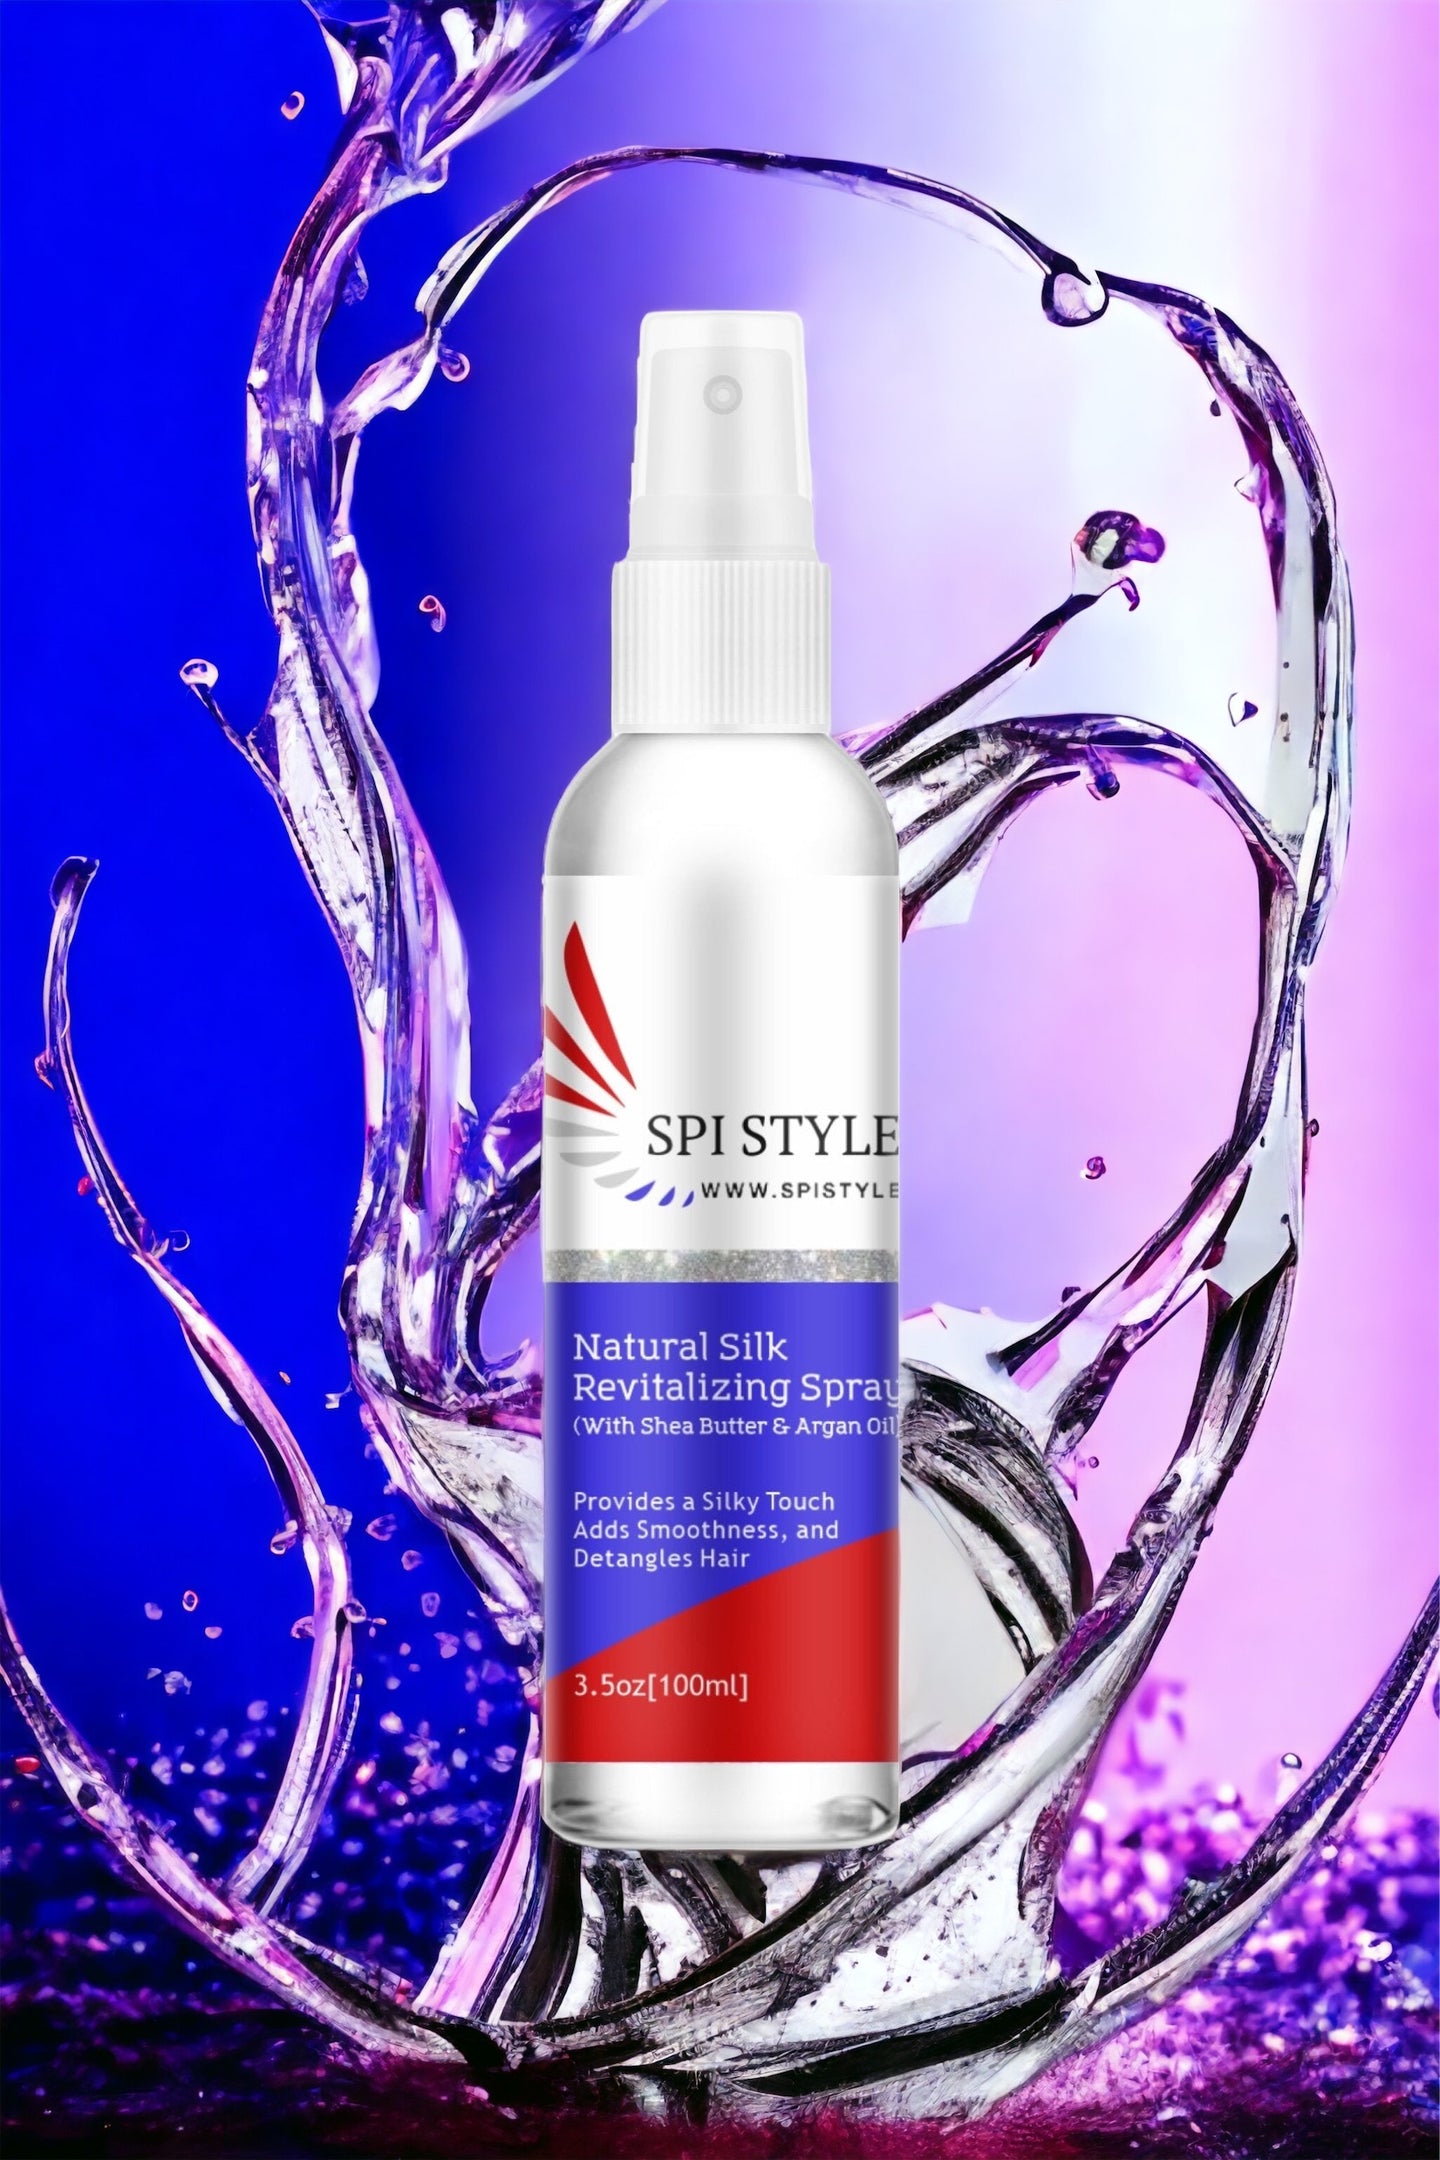 SPI Styles 360 GOLD Ultra Fine Water Mister - Continuous Aerosol Free